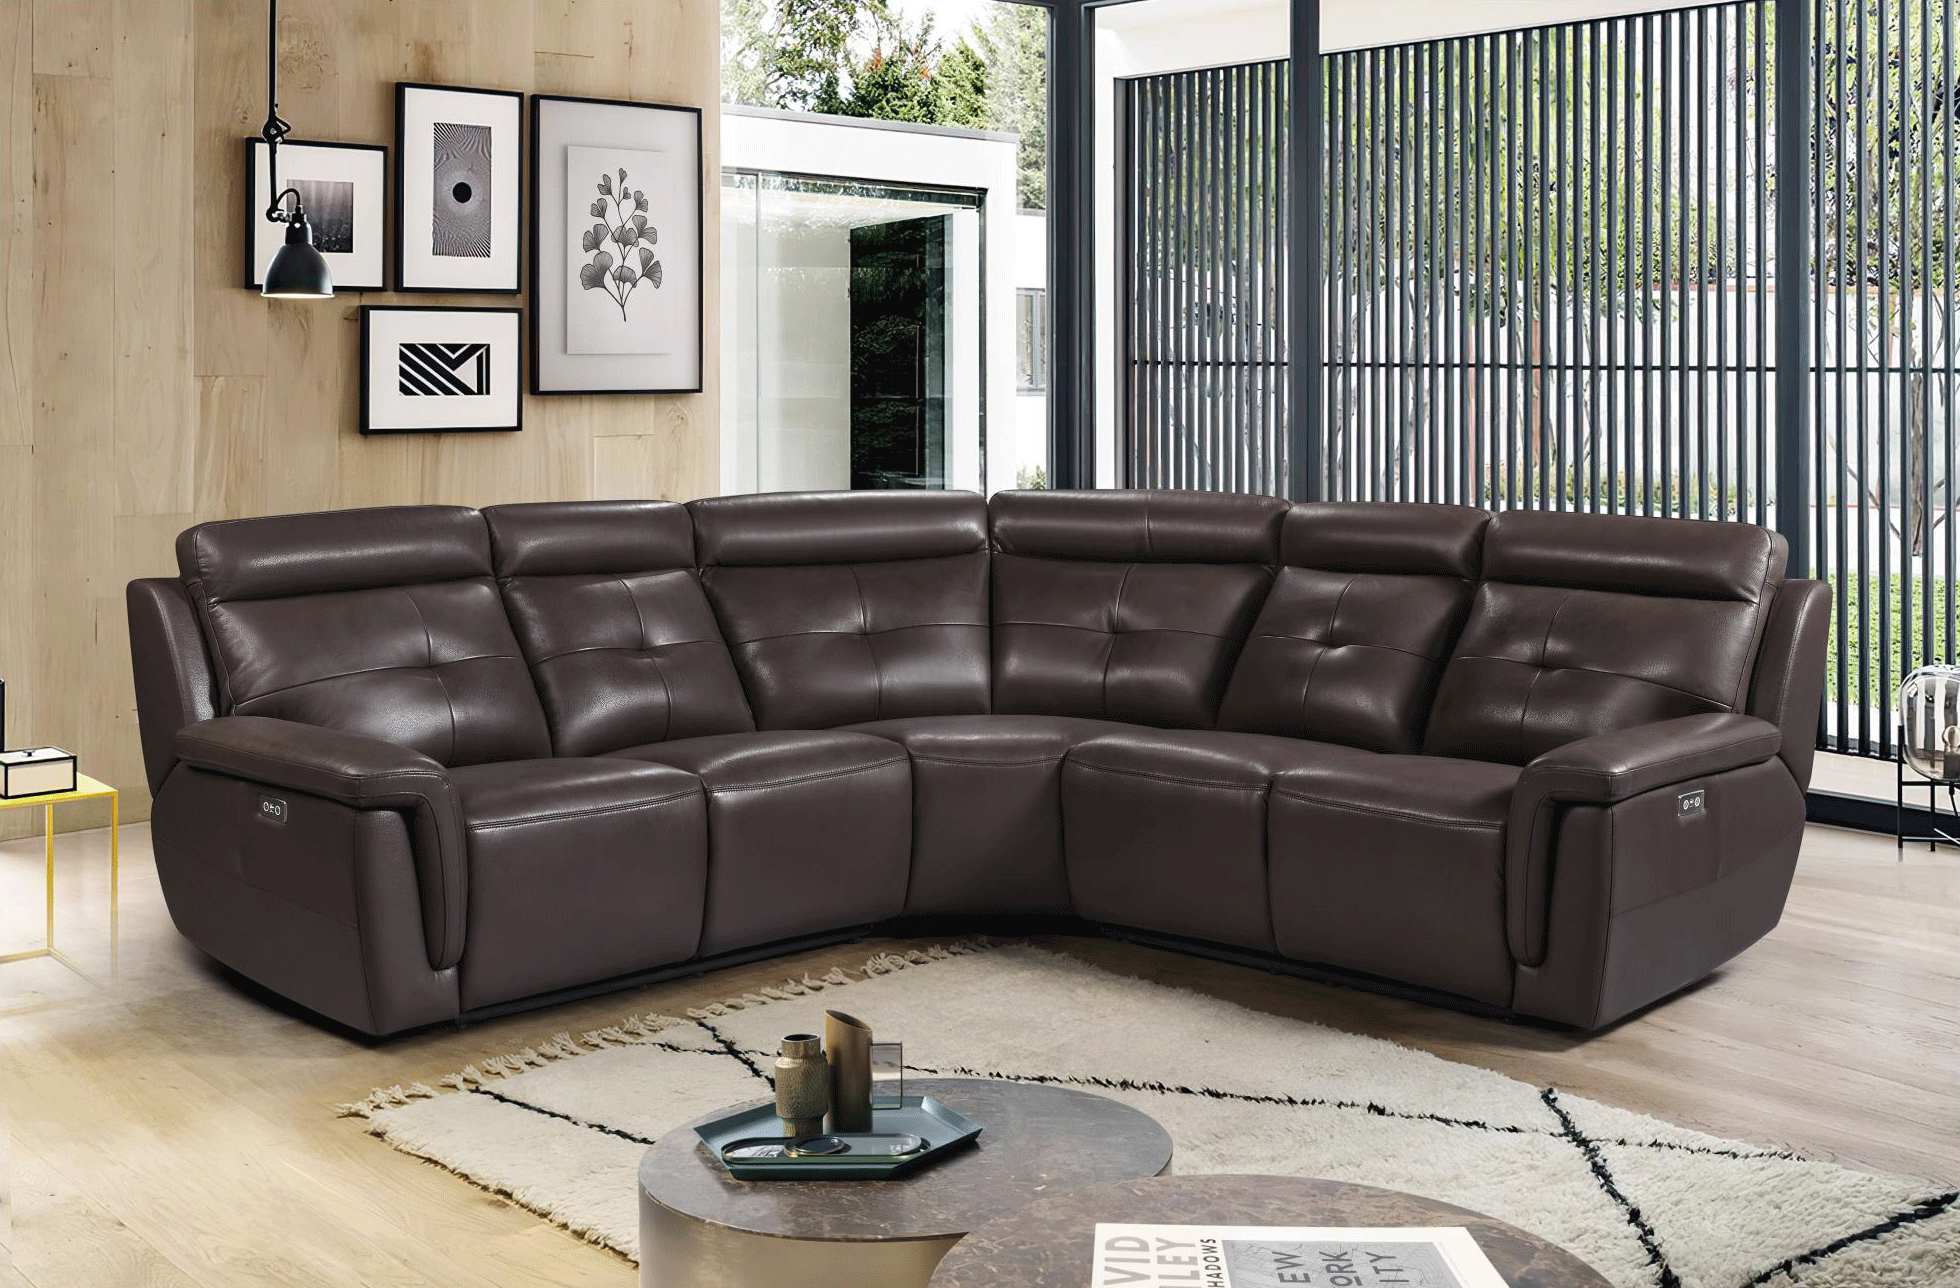 Brands SWH Modern Living Special Order 2937 Sectional w/ electric recliners